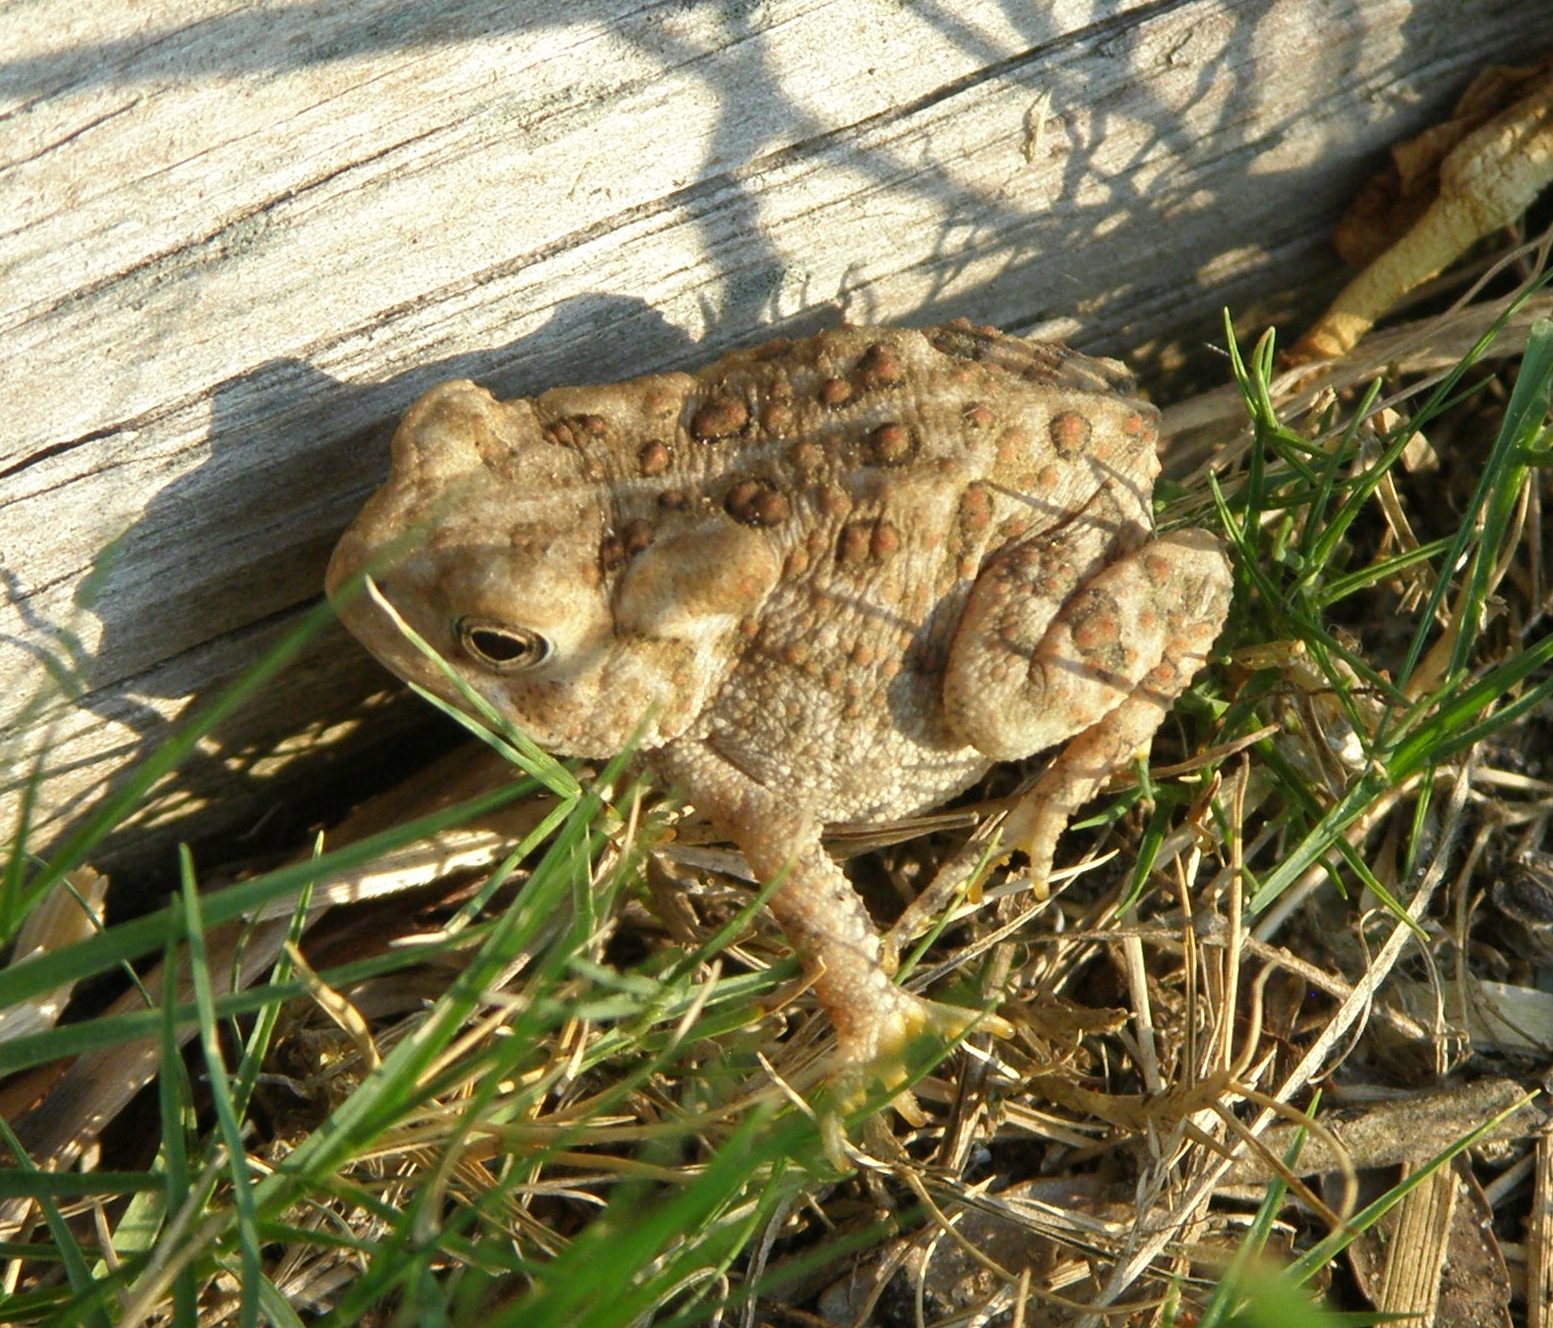 a toy frog in the grass with other items